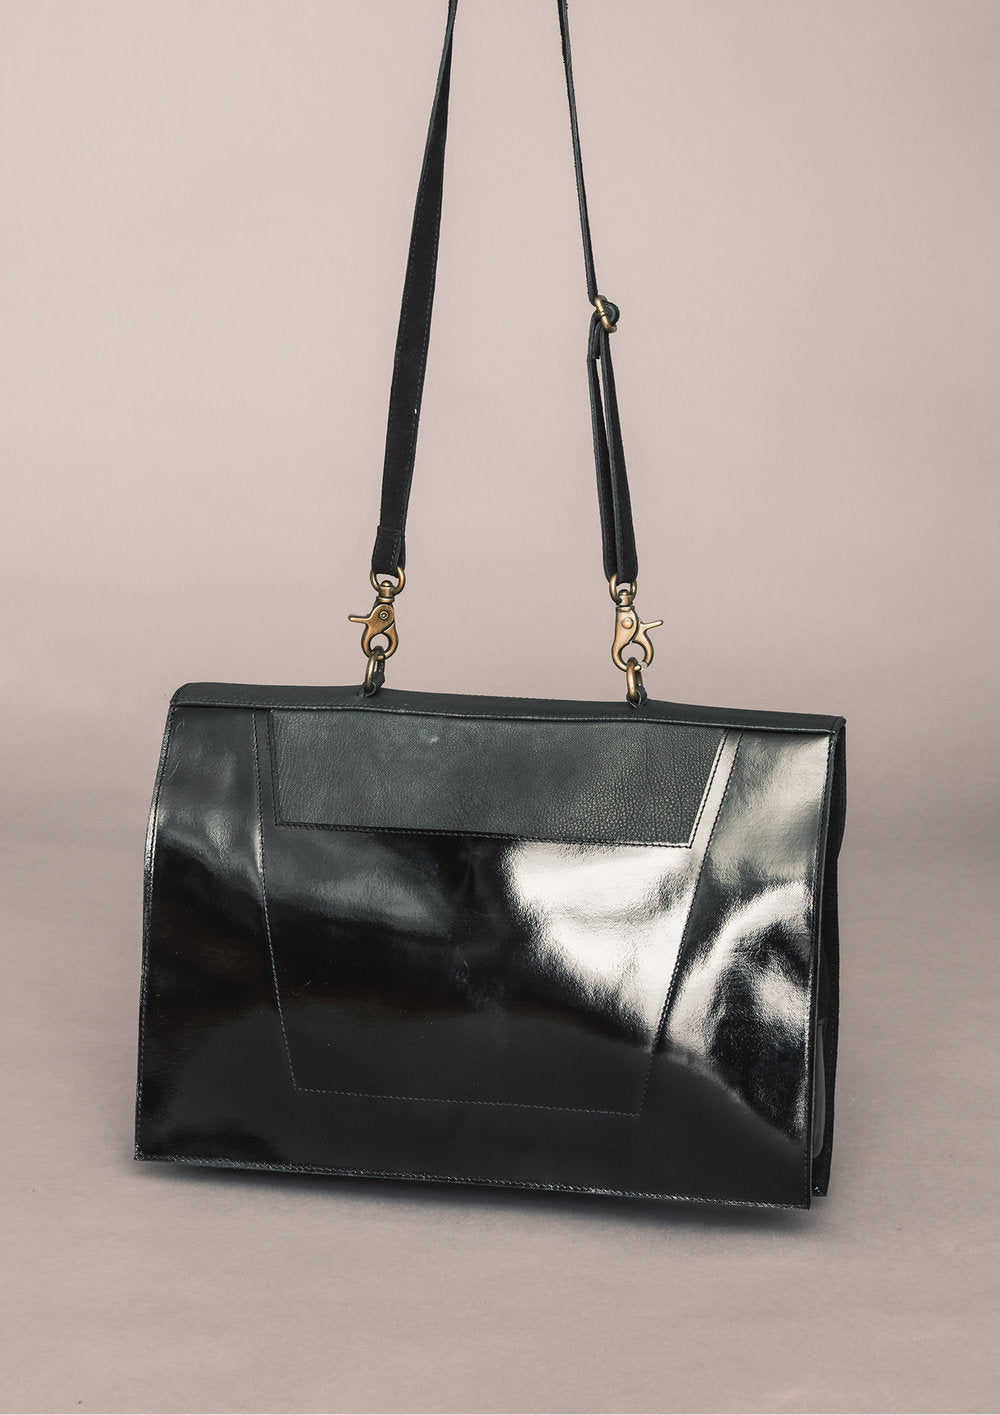 BRIEFCASE - LEATHER black by BERENIK